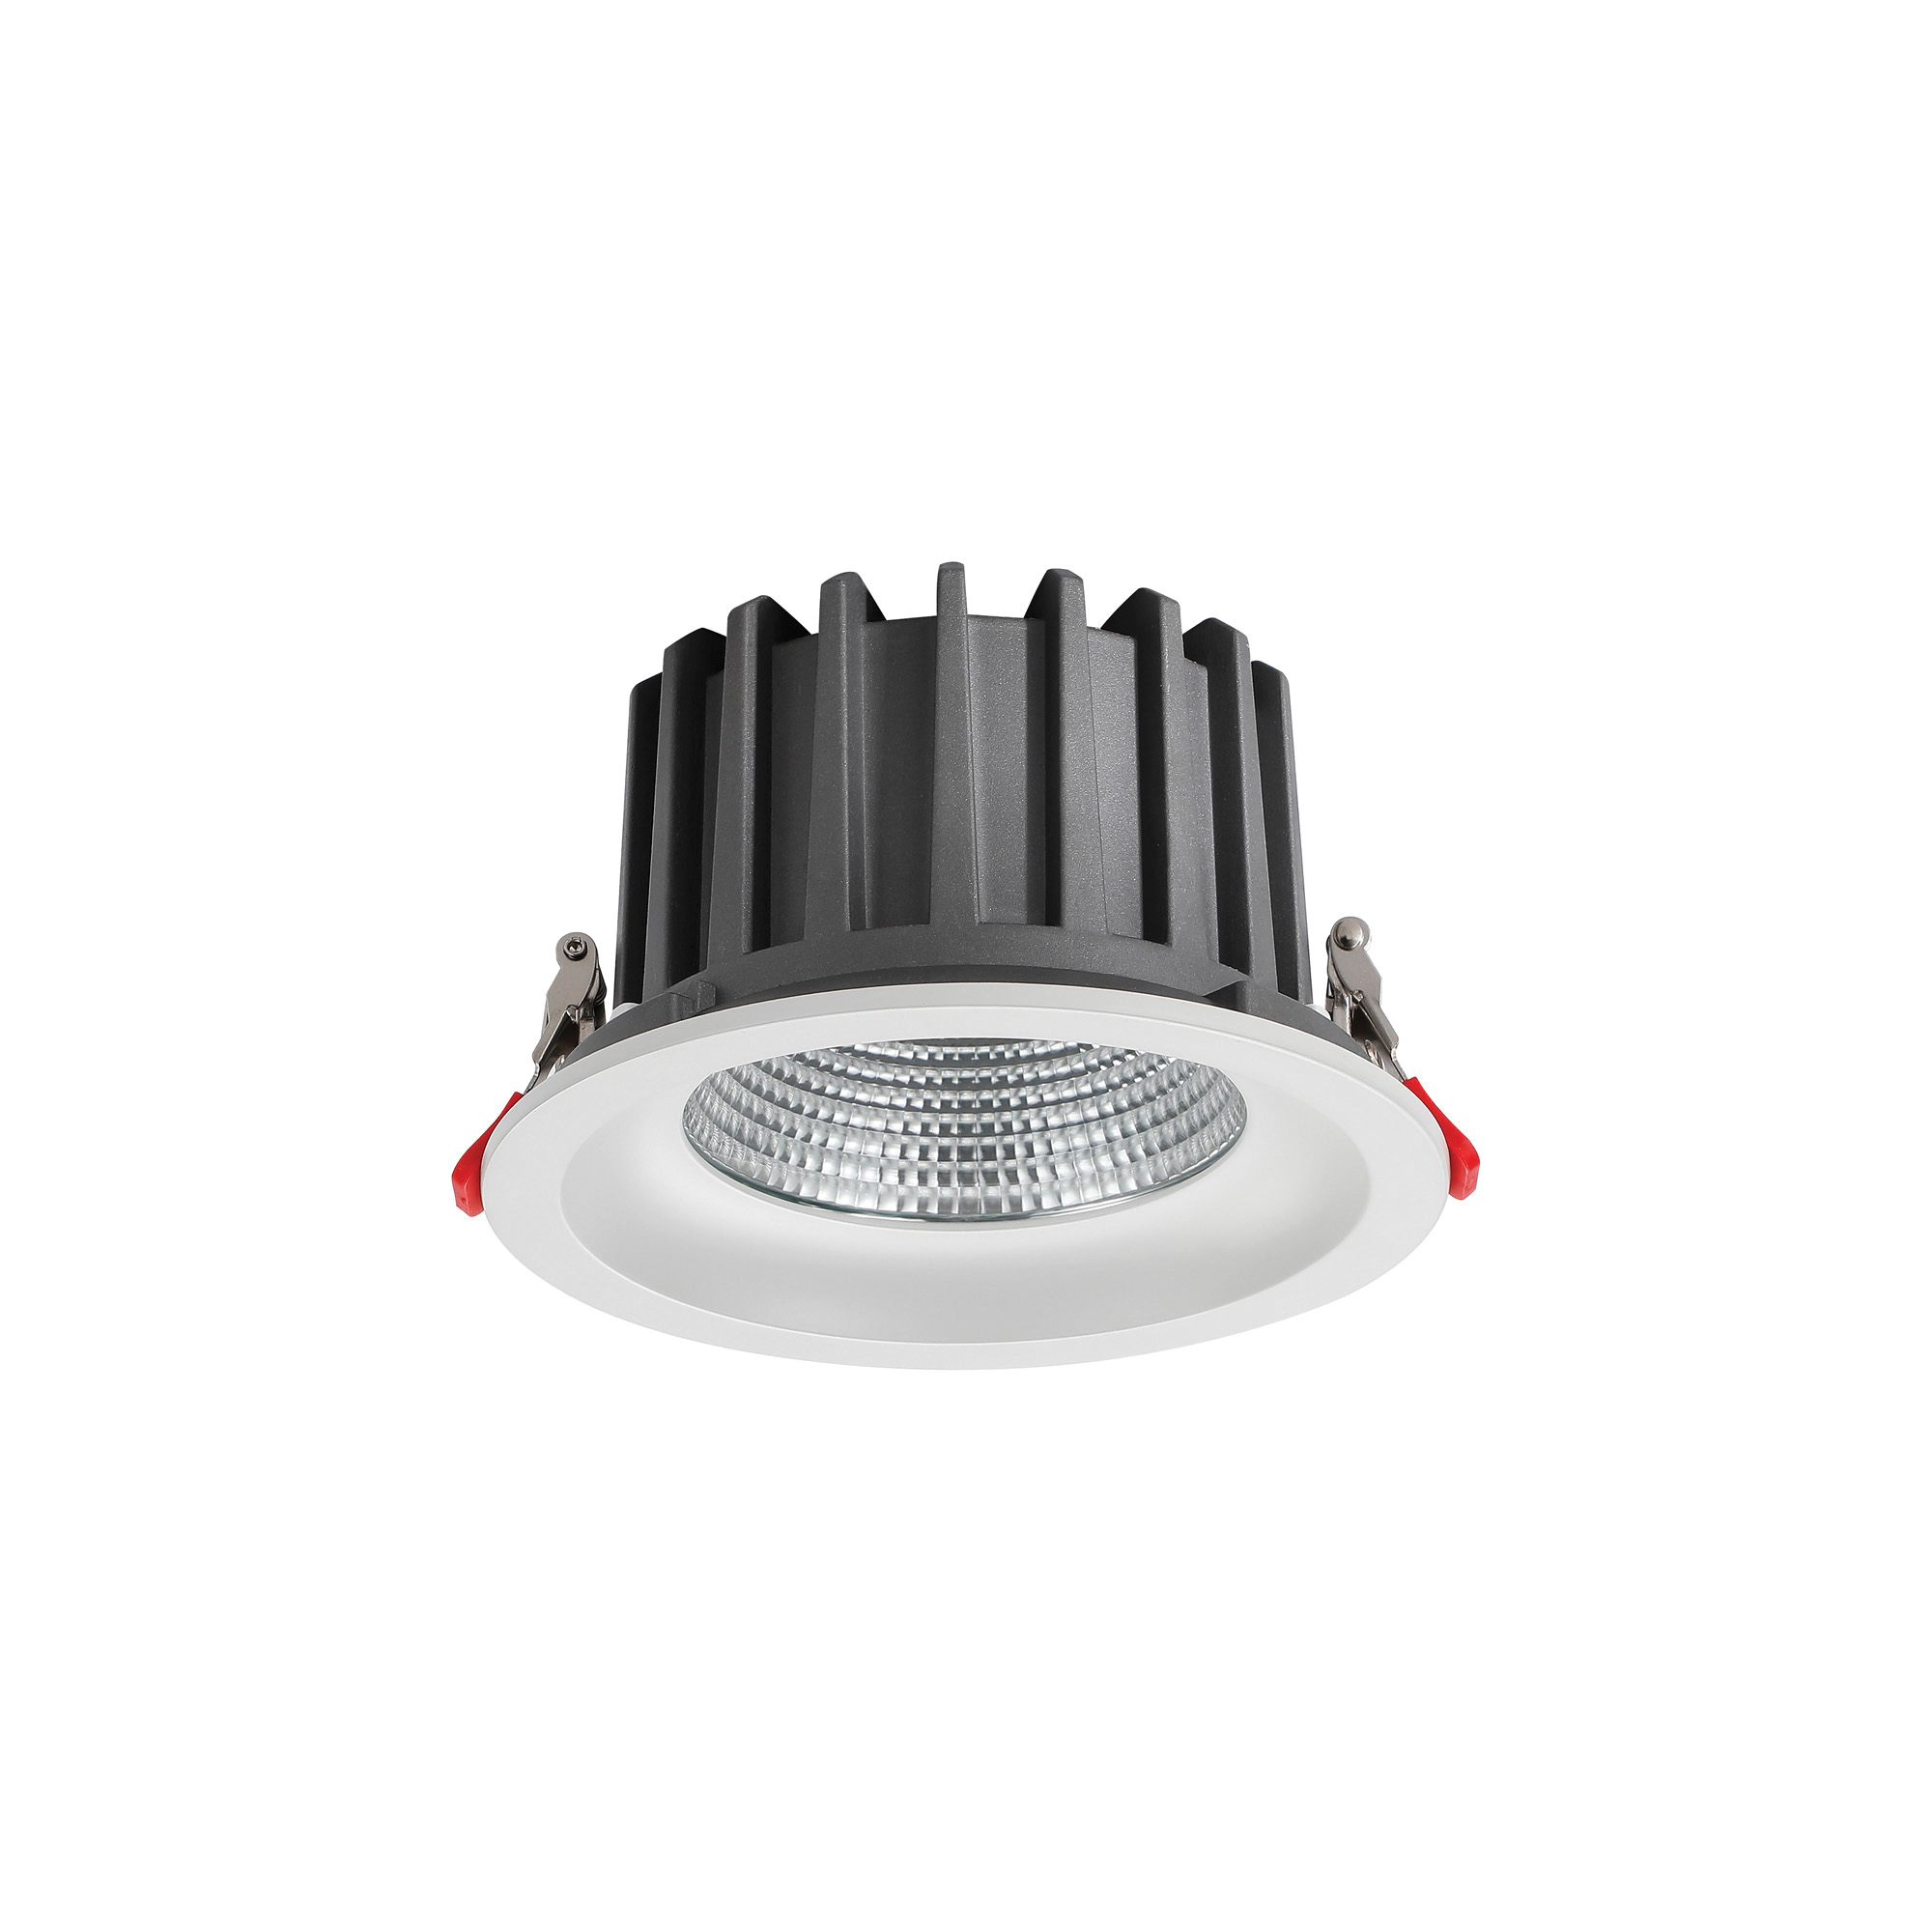 DL200063  Bionic 30, 30W, 700mA, White Deep Round Recessed Downlight, 2550lm ,Cut Out 155mm, 42° , 5000K, IP44, DRIVER INC., 5yrs Warranty.